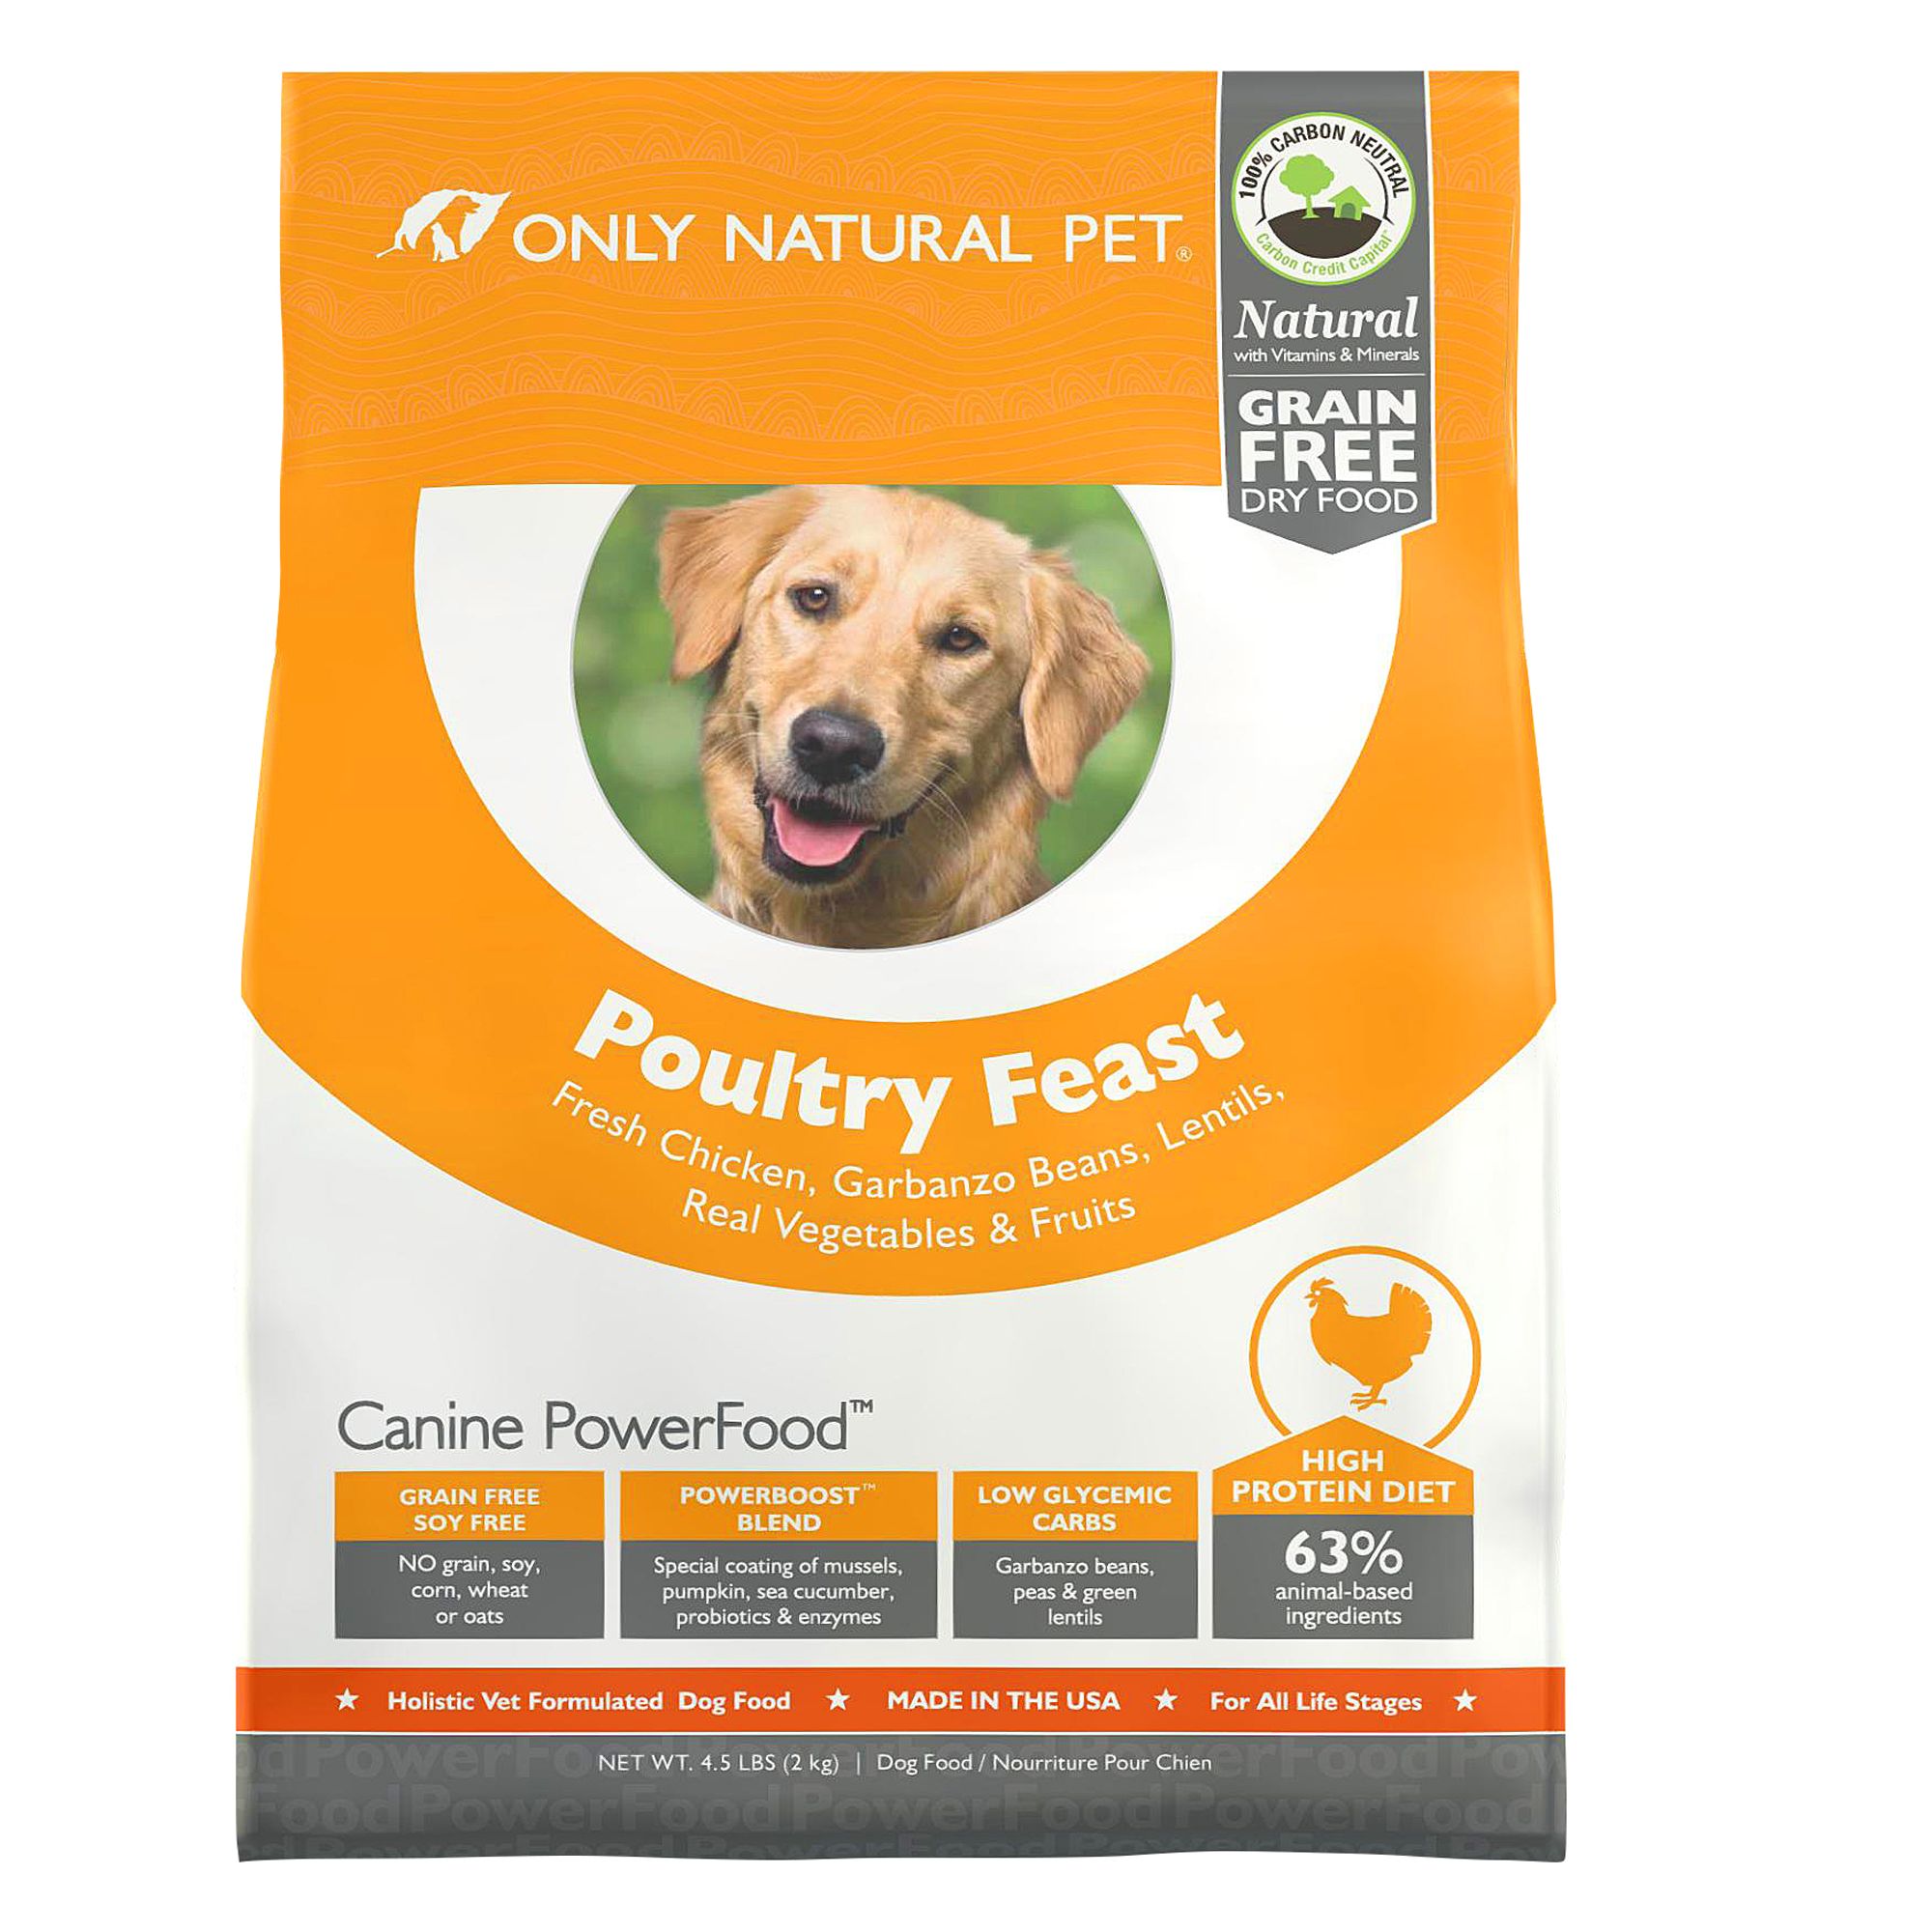 Only Natural Pet® Canine PowerFood Dog 